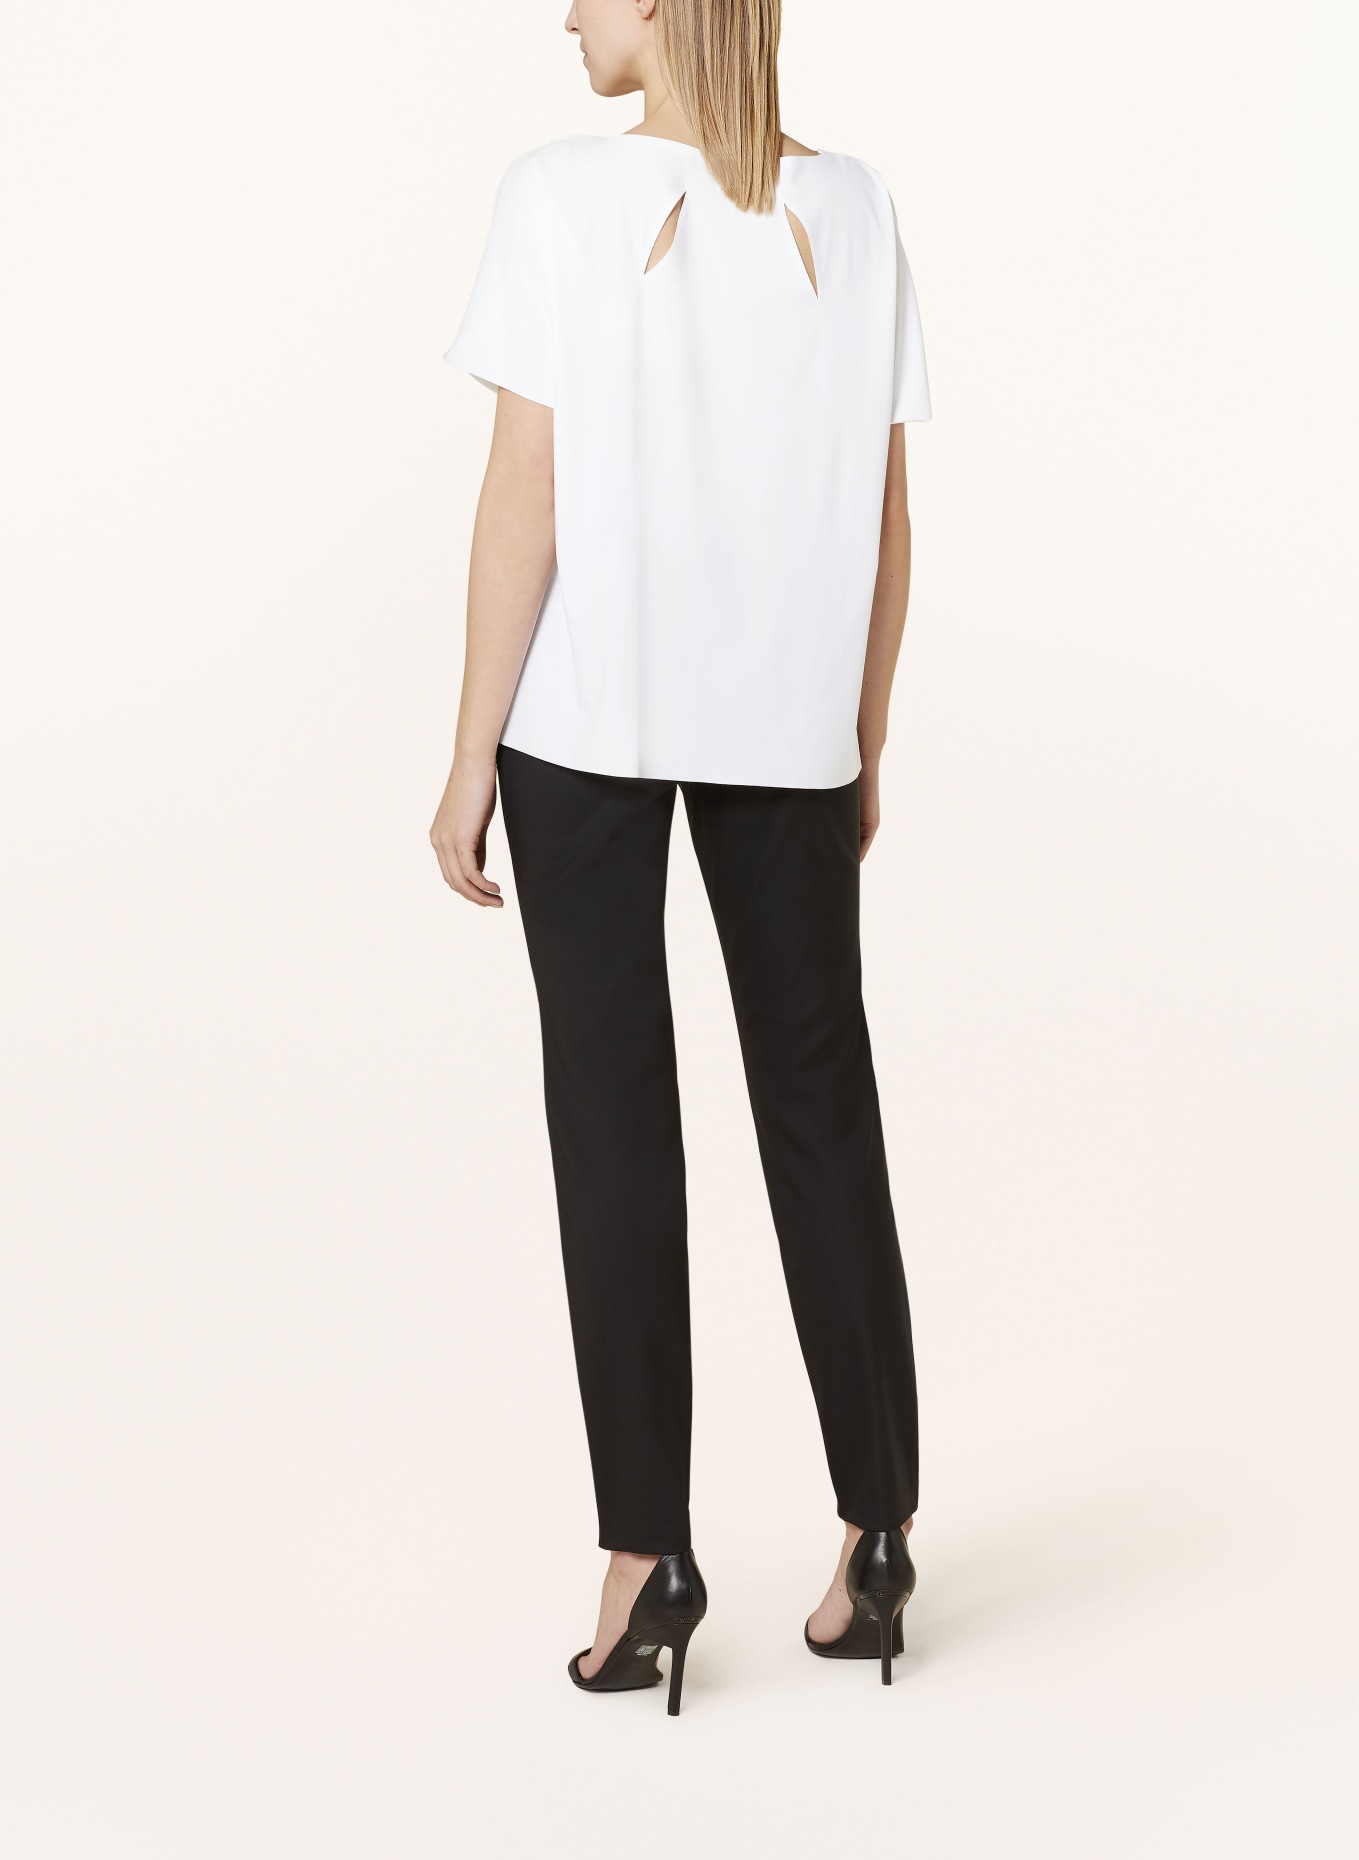 SPORTALM Shirt blouse with cut-outs, Color: WHITE (Image 3)